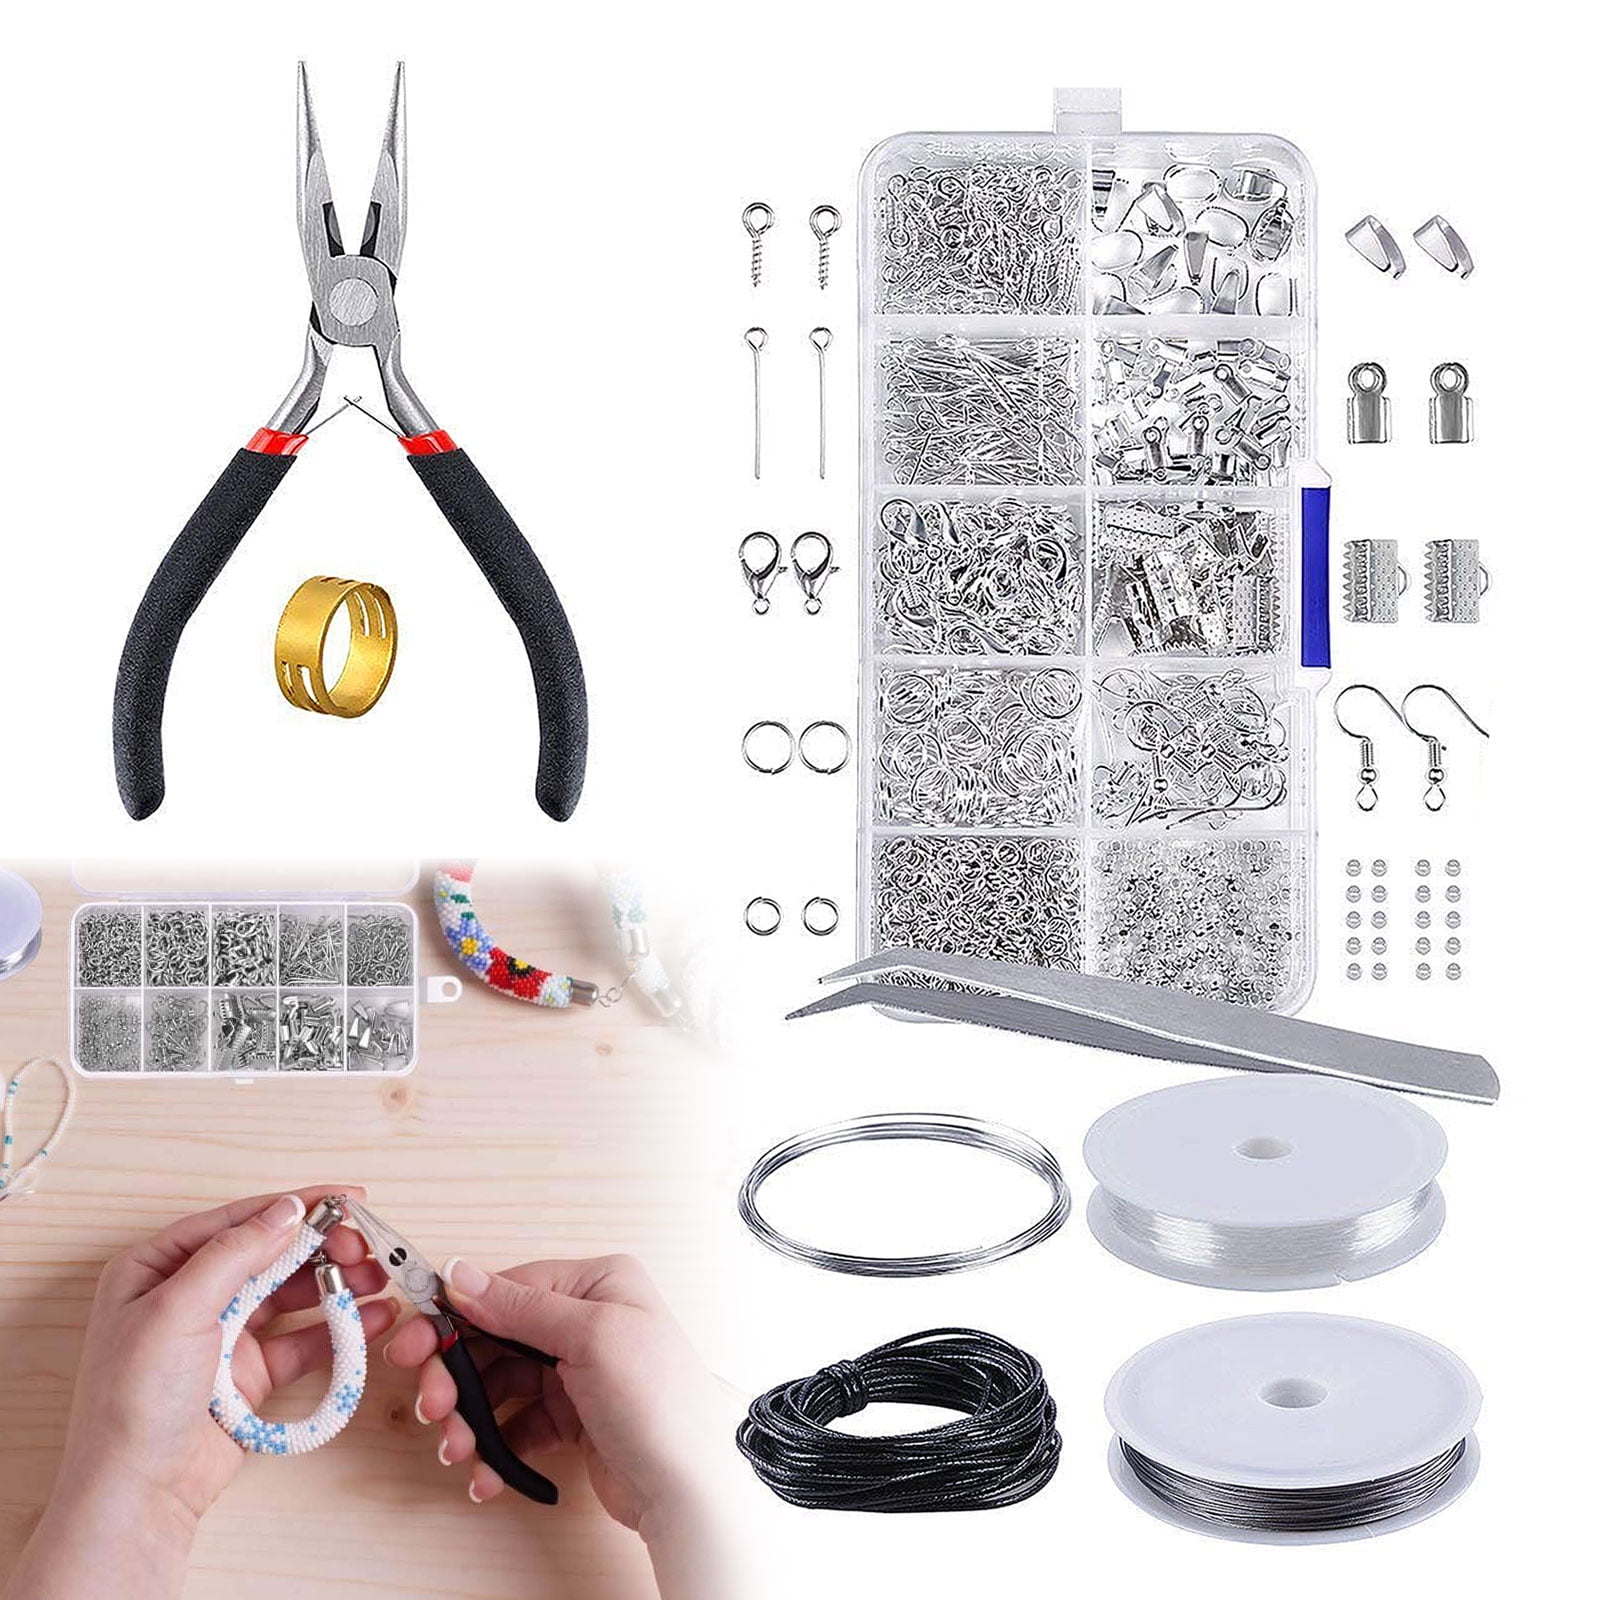 Jewelry Making Supplies Kit - Jewelry Repair Tools with Accessories ...